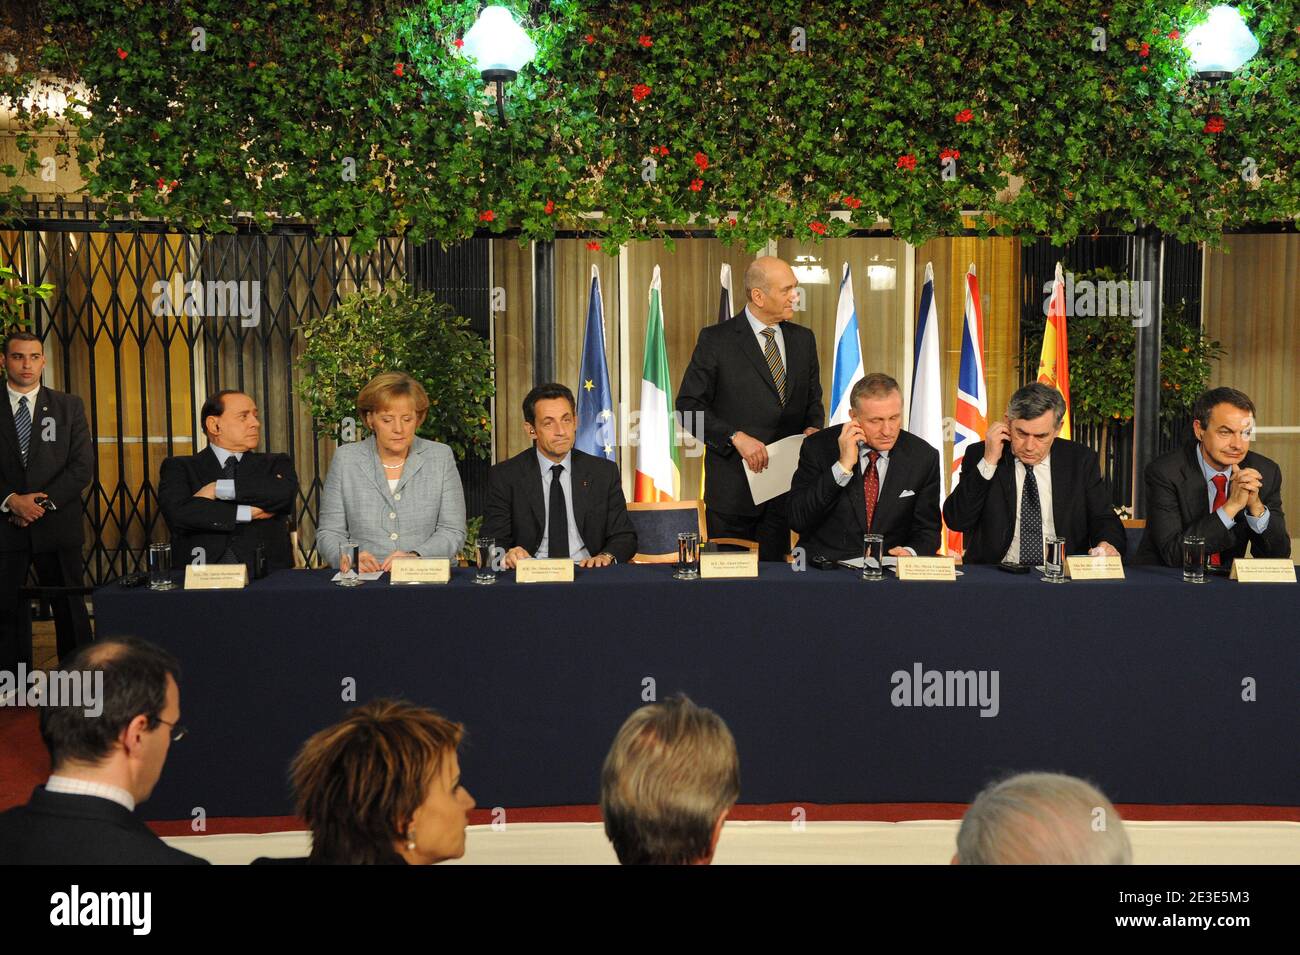 (R-L) Spanish Prime Minister Jose Luis Rodriguez Zapatero, Great Britain's Prime Minister Gordon Brown, Czech Prime Minister Mirek TopolÀnek, Israeli Prime Minister Ehud Olmert, French President Nicolas Sarkozy and German Chancellor Angela Merkel and Italian Prime Minister Silvio Berlusconi seen during a joint press conference at the residence of Israeli Prime Minister Ehud Olmert in Jerusalem, Israel on January 18, 2009. Photo by Ammar Abd Rabbo/ABACAPRESS.COM Stock Photo